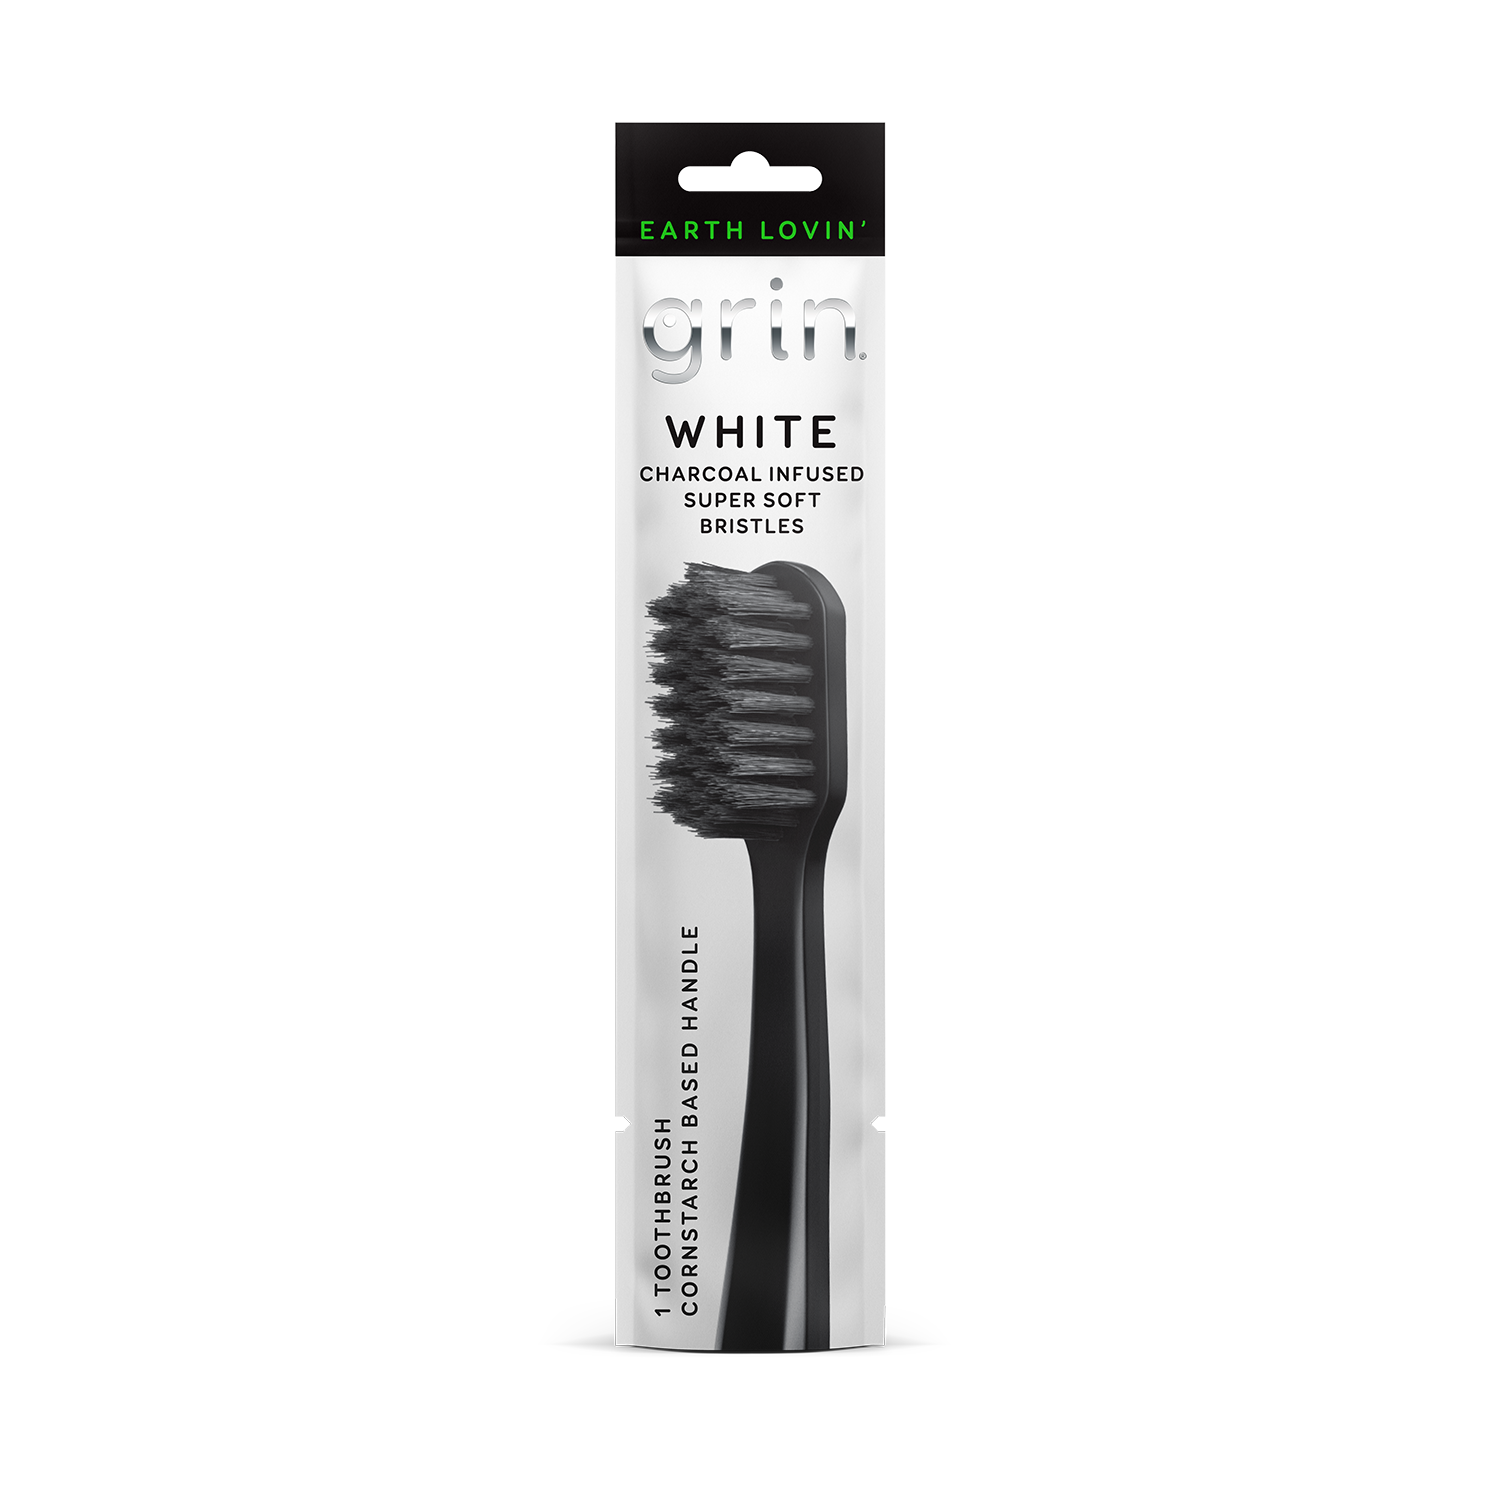 Grin Oral Care White Charcoal Infused Toothbrush